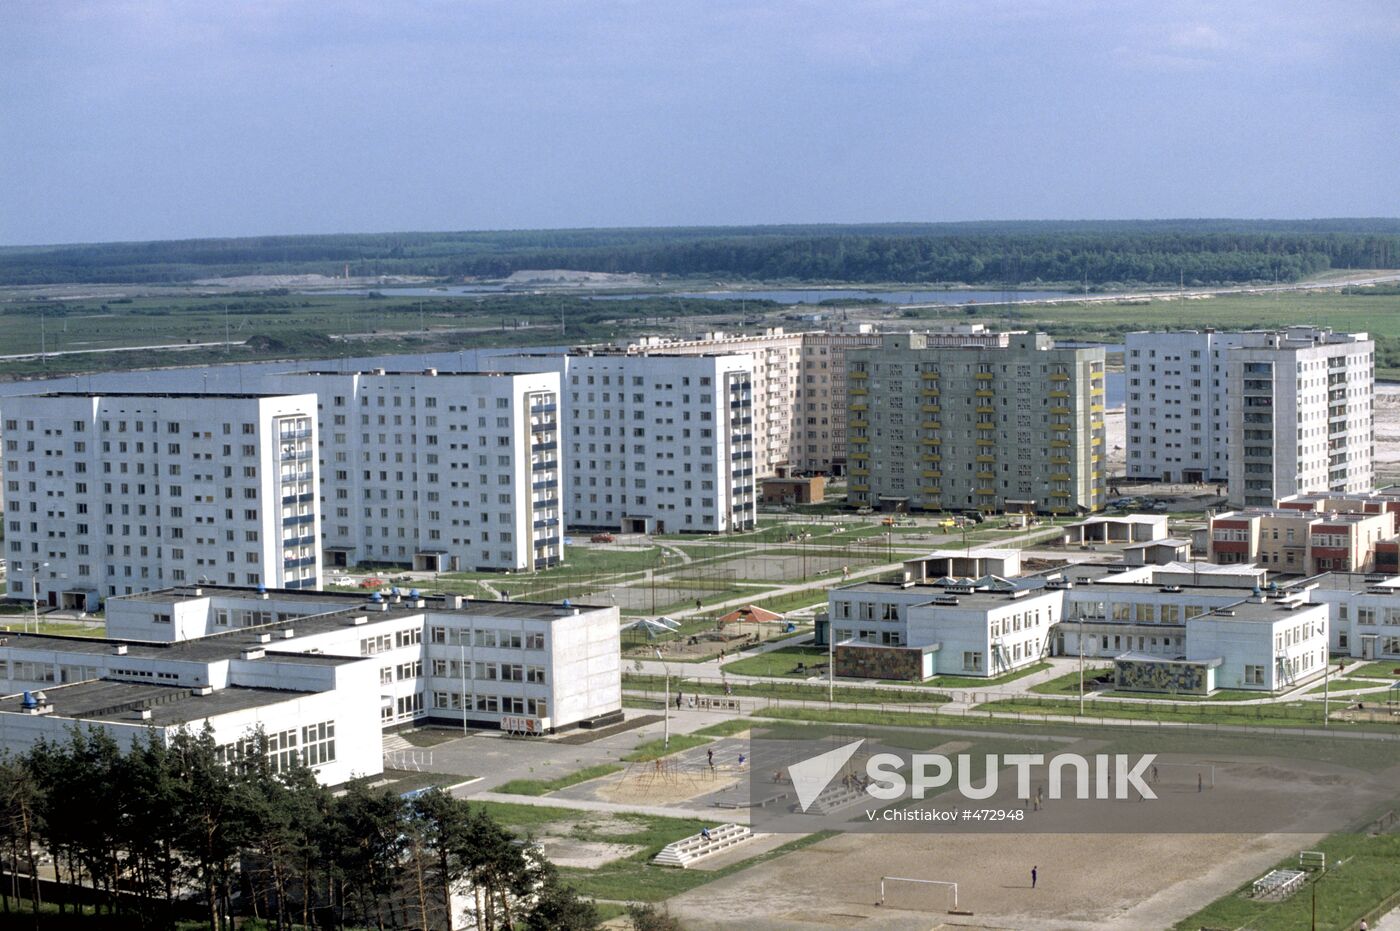 Residential buildings for Khmelnitsky NPP construction workers